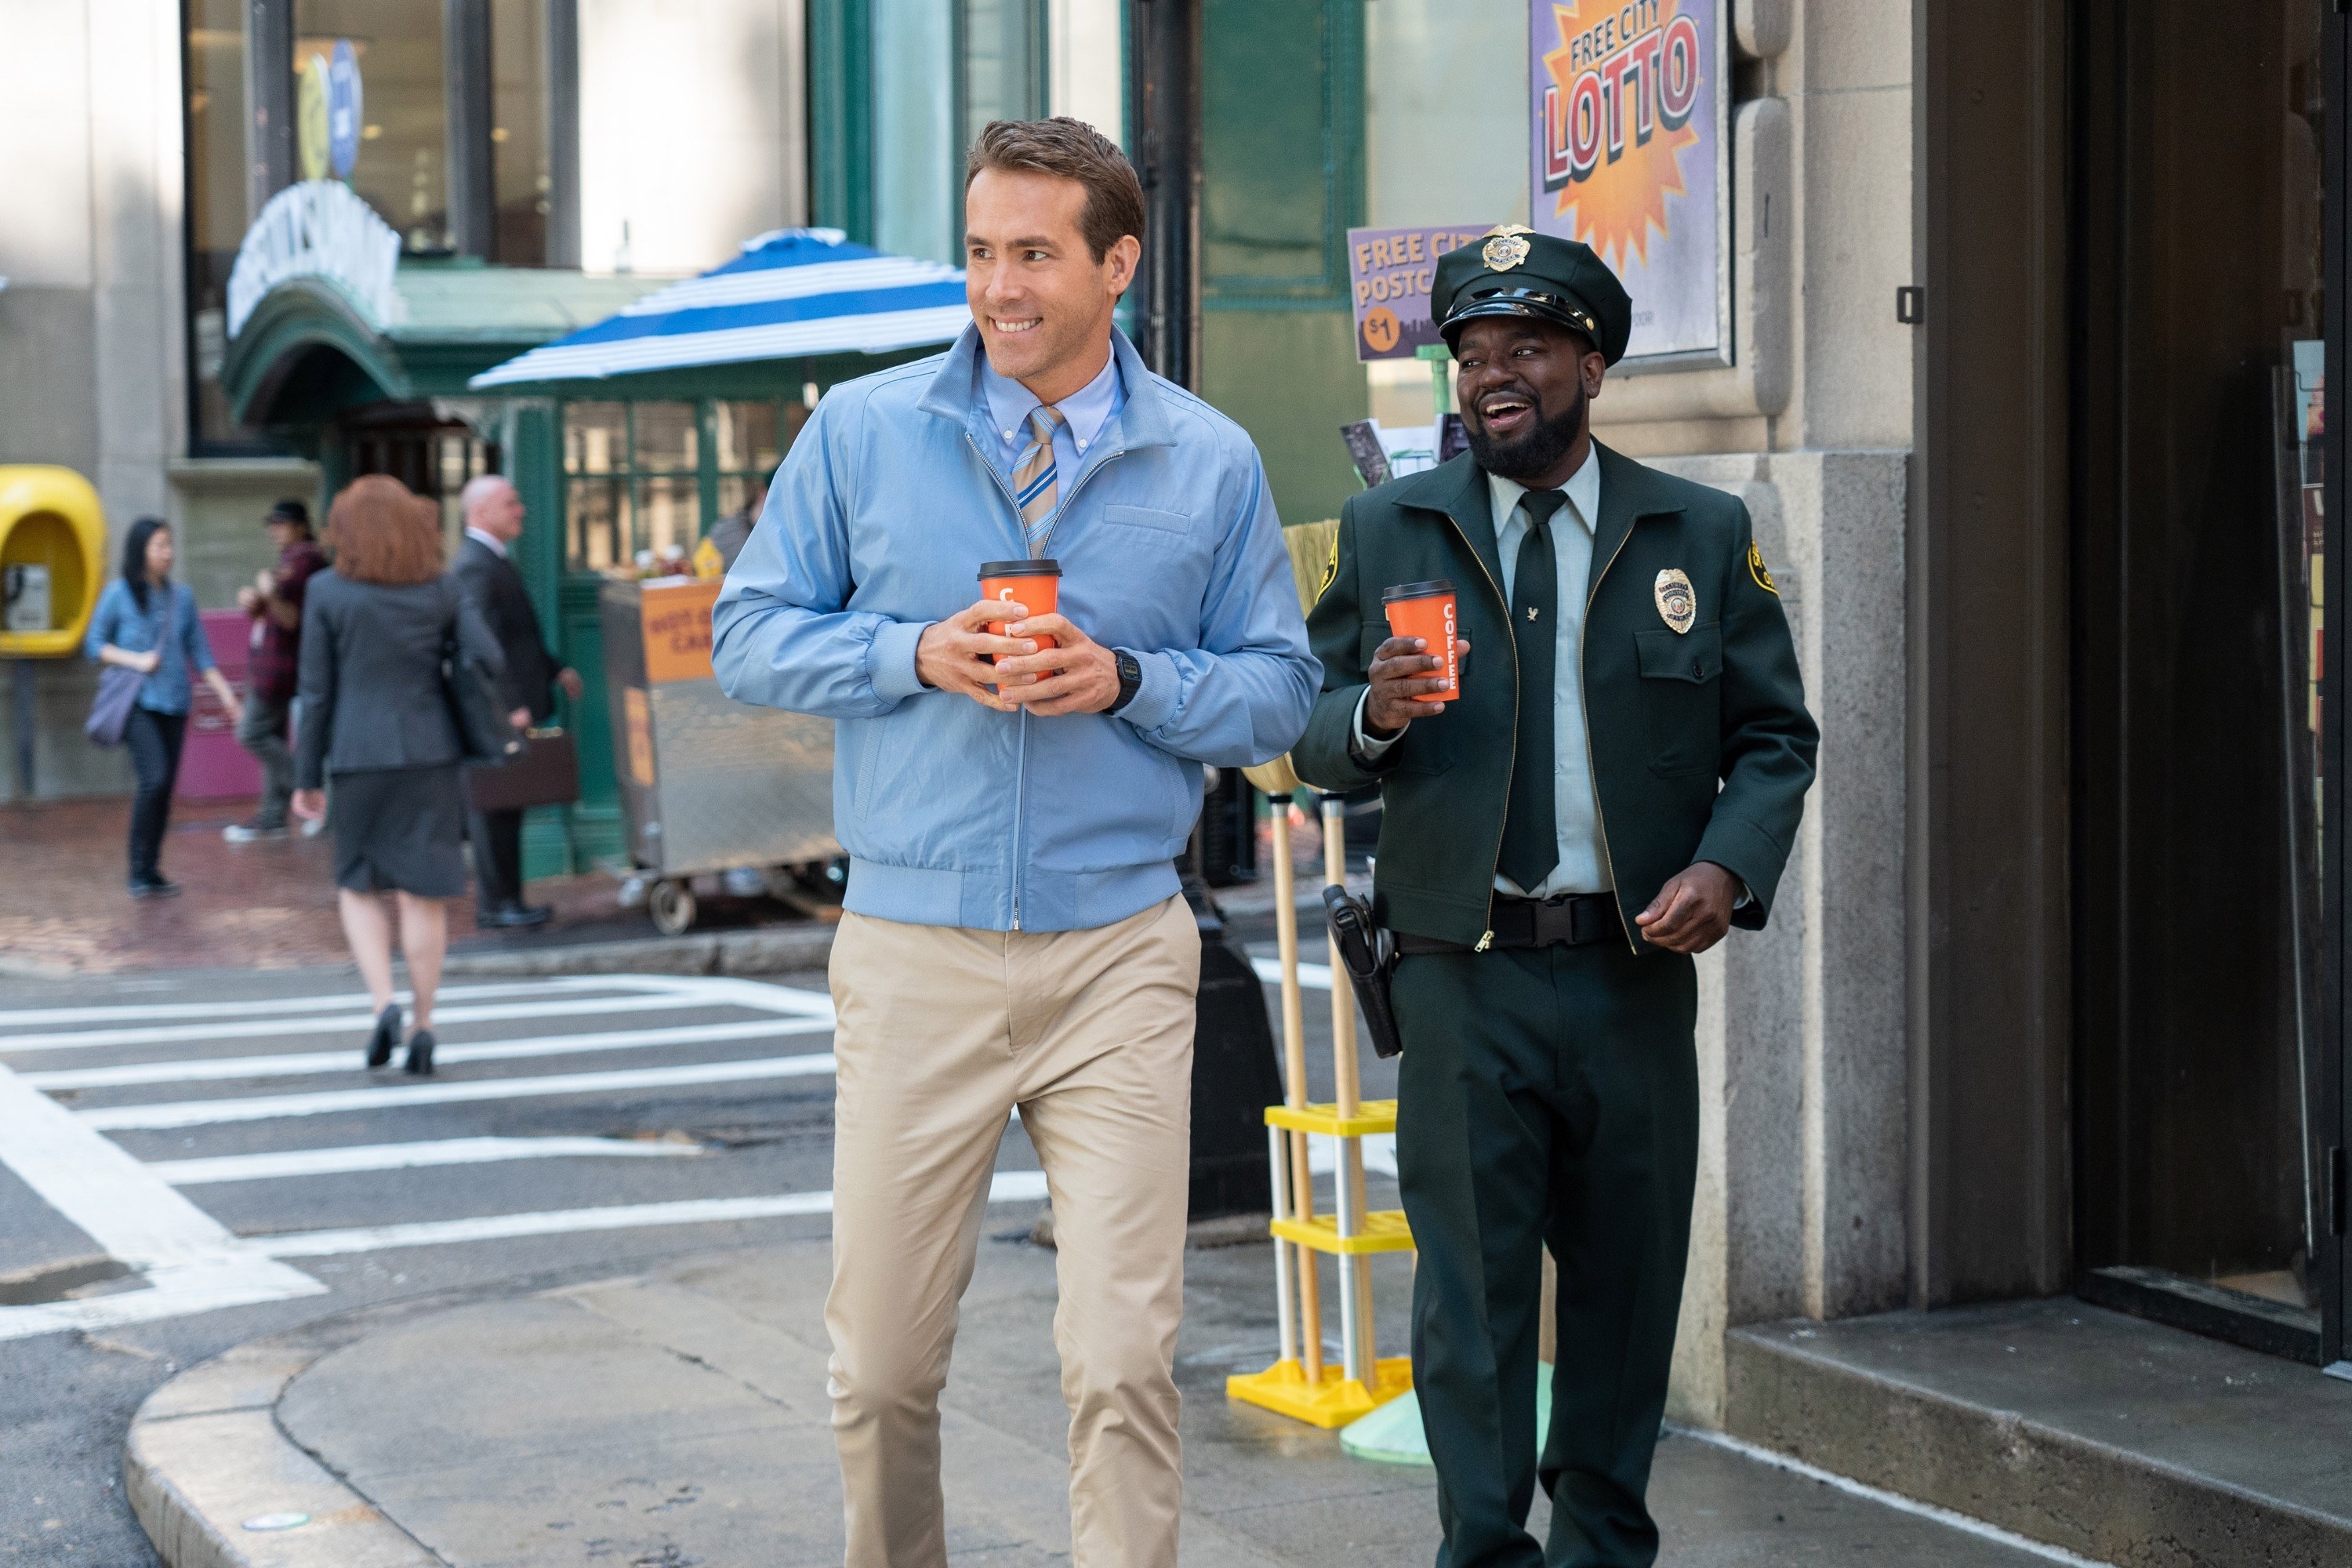 Ryan Reynolds and Lil Rel Howery walk down the street